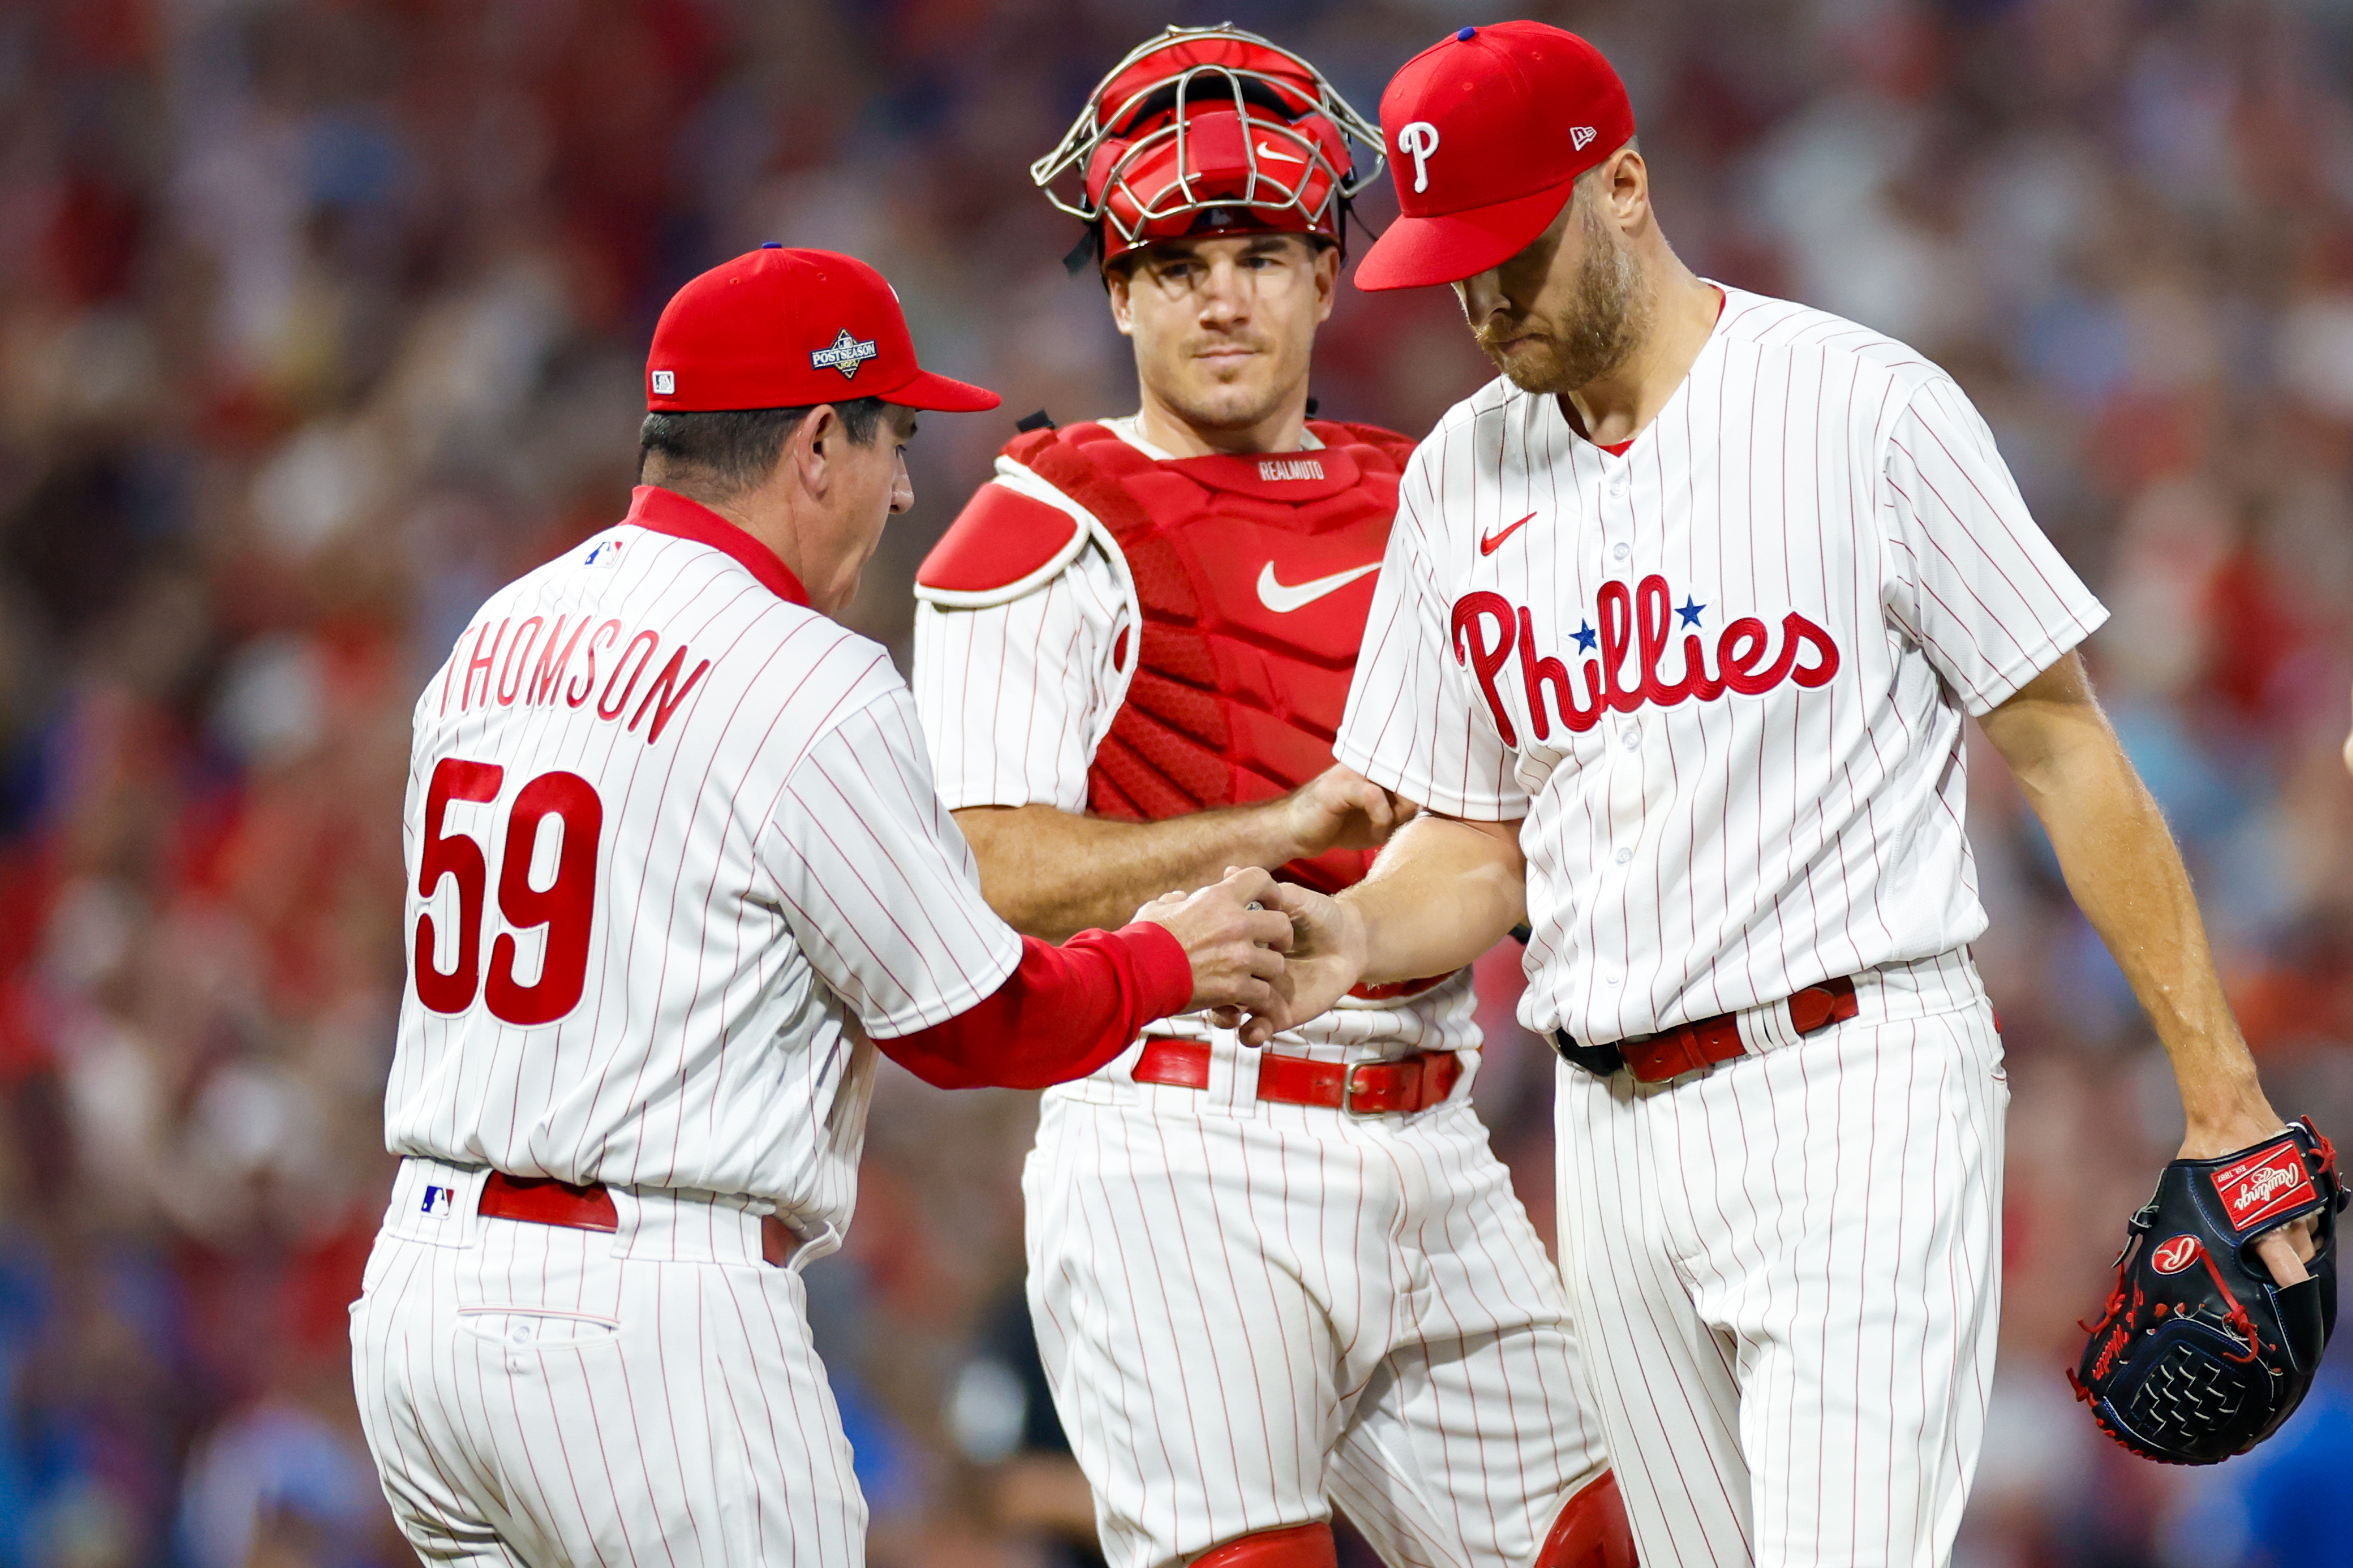 Phillies finalize postseason roster, Game 1 lineup for wild card